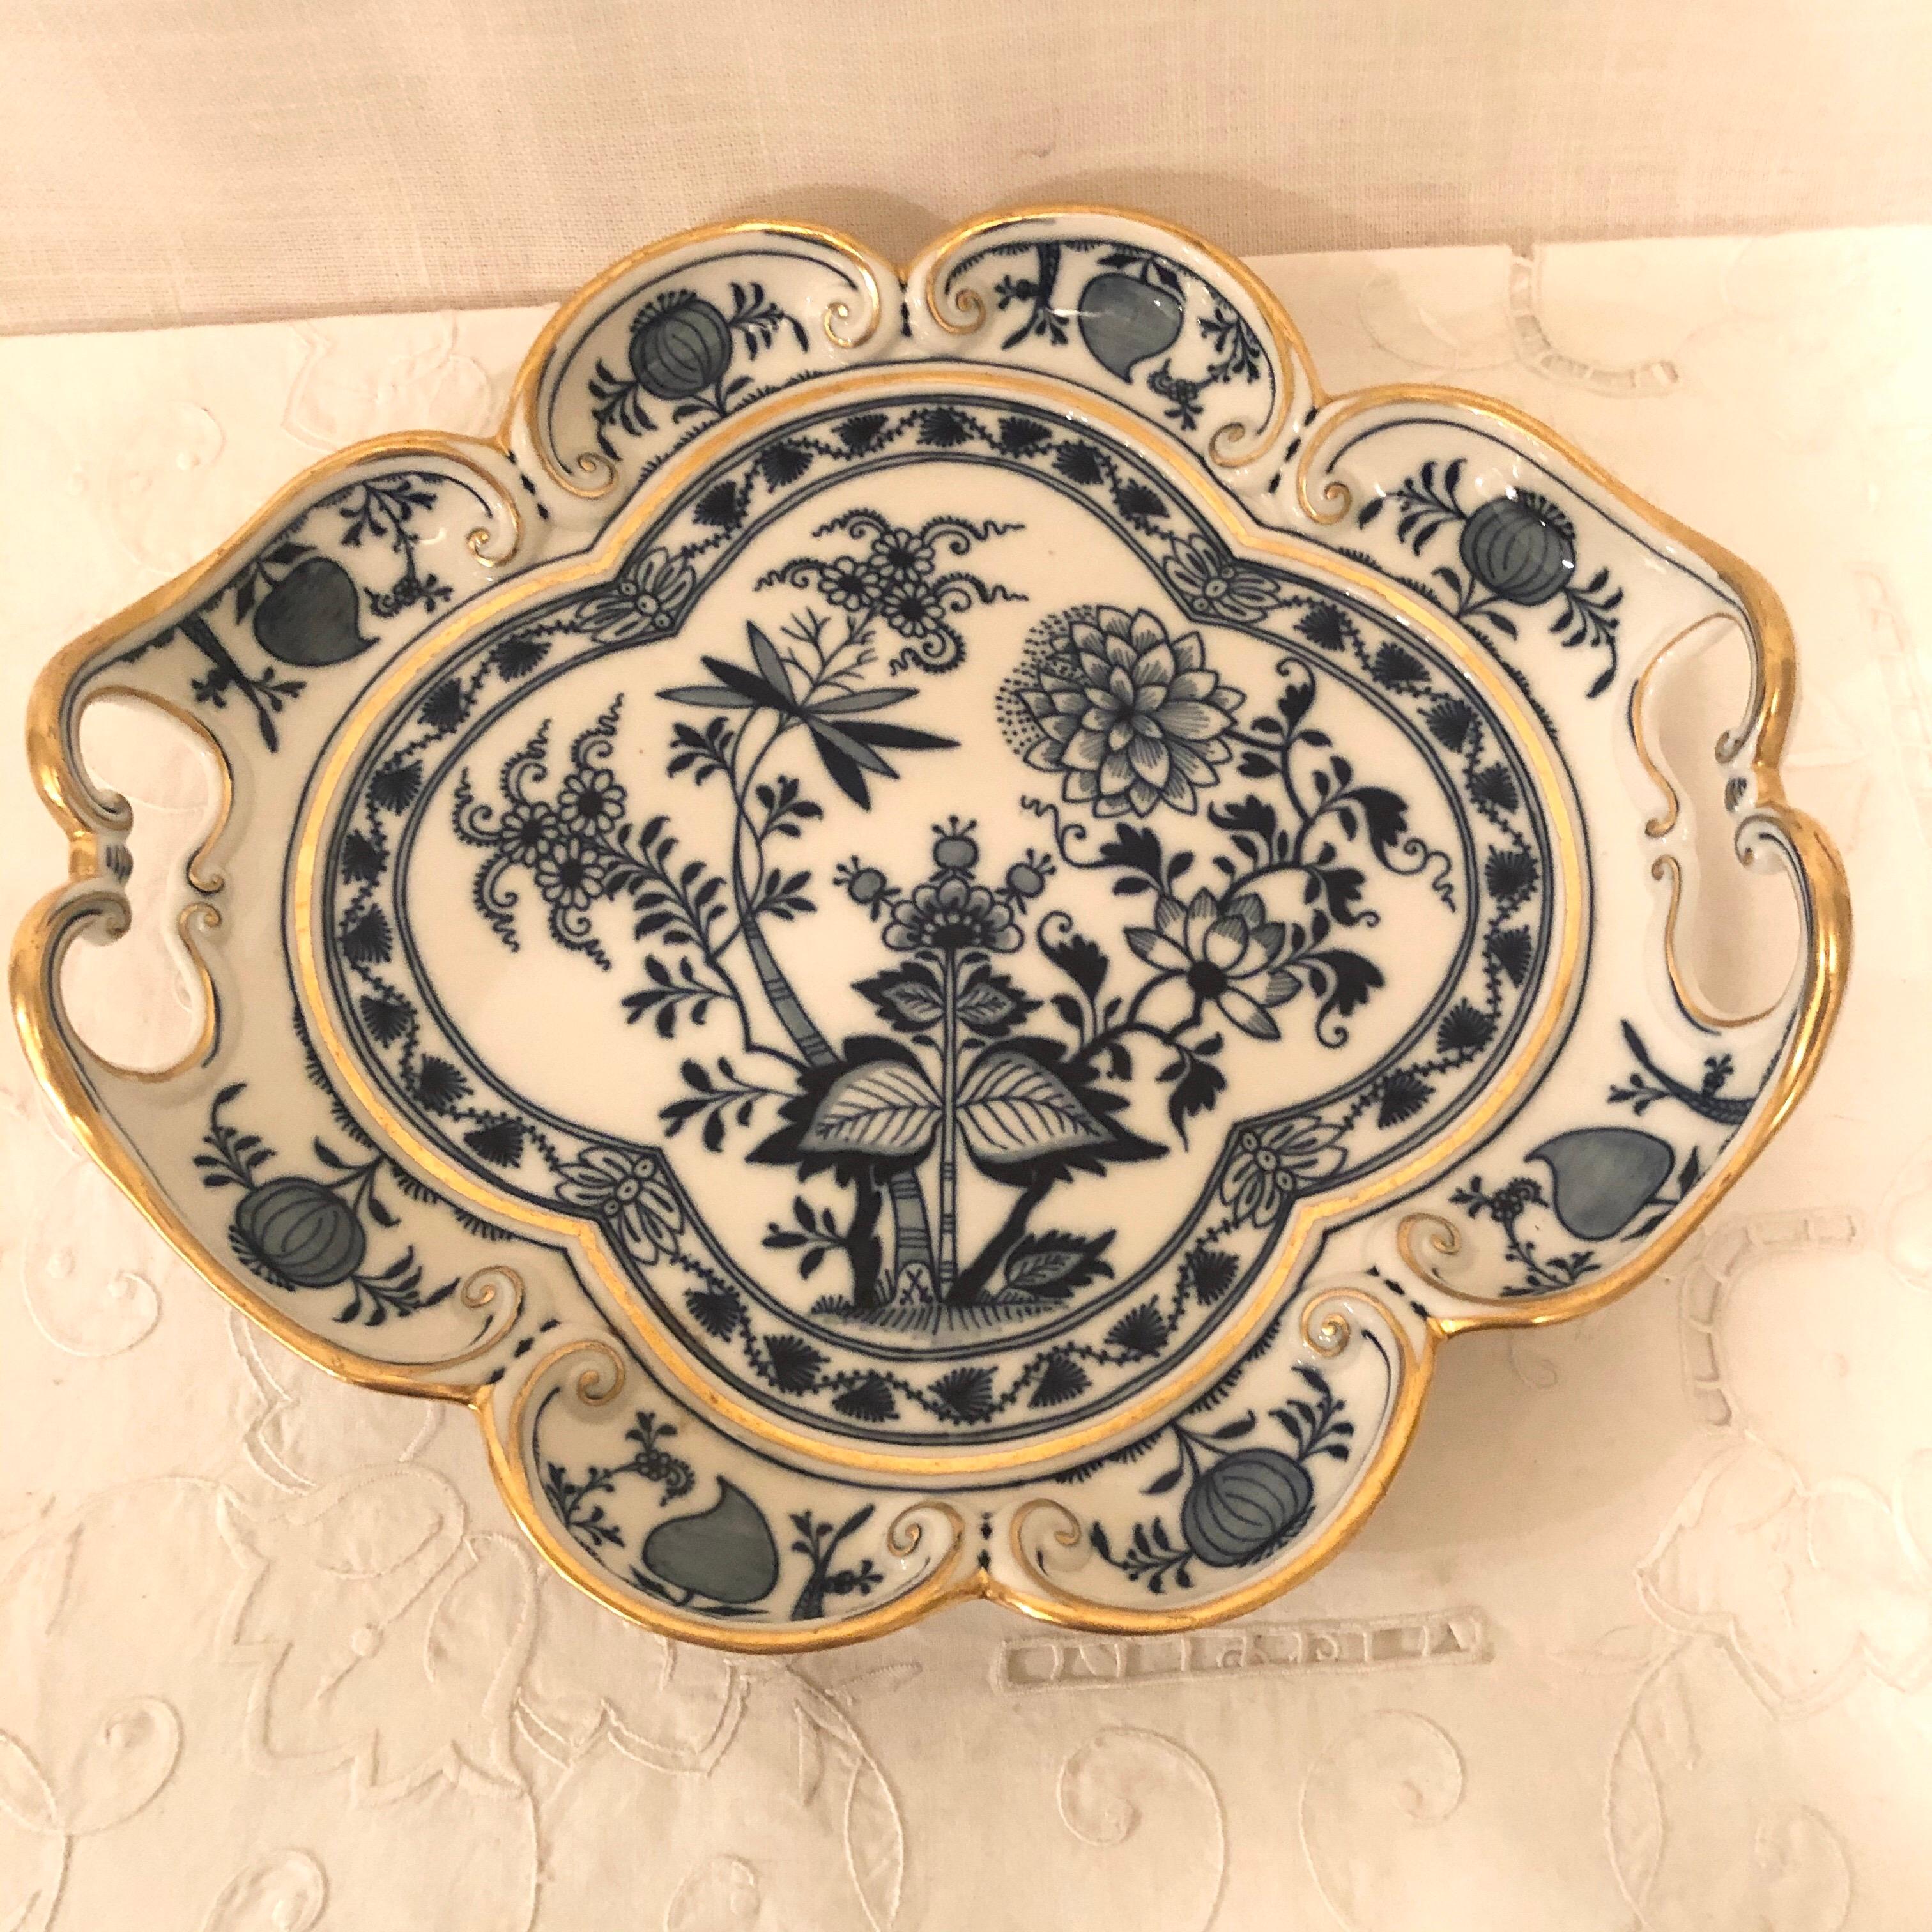 German Meissen Blue Onion Fluted Serving Tray with Gold Border and Handles